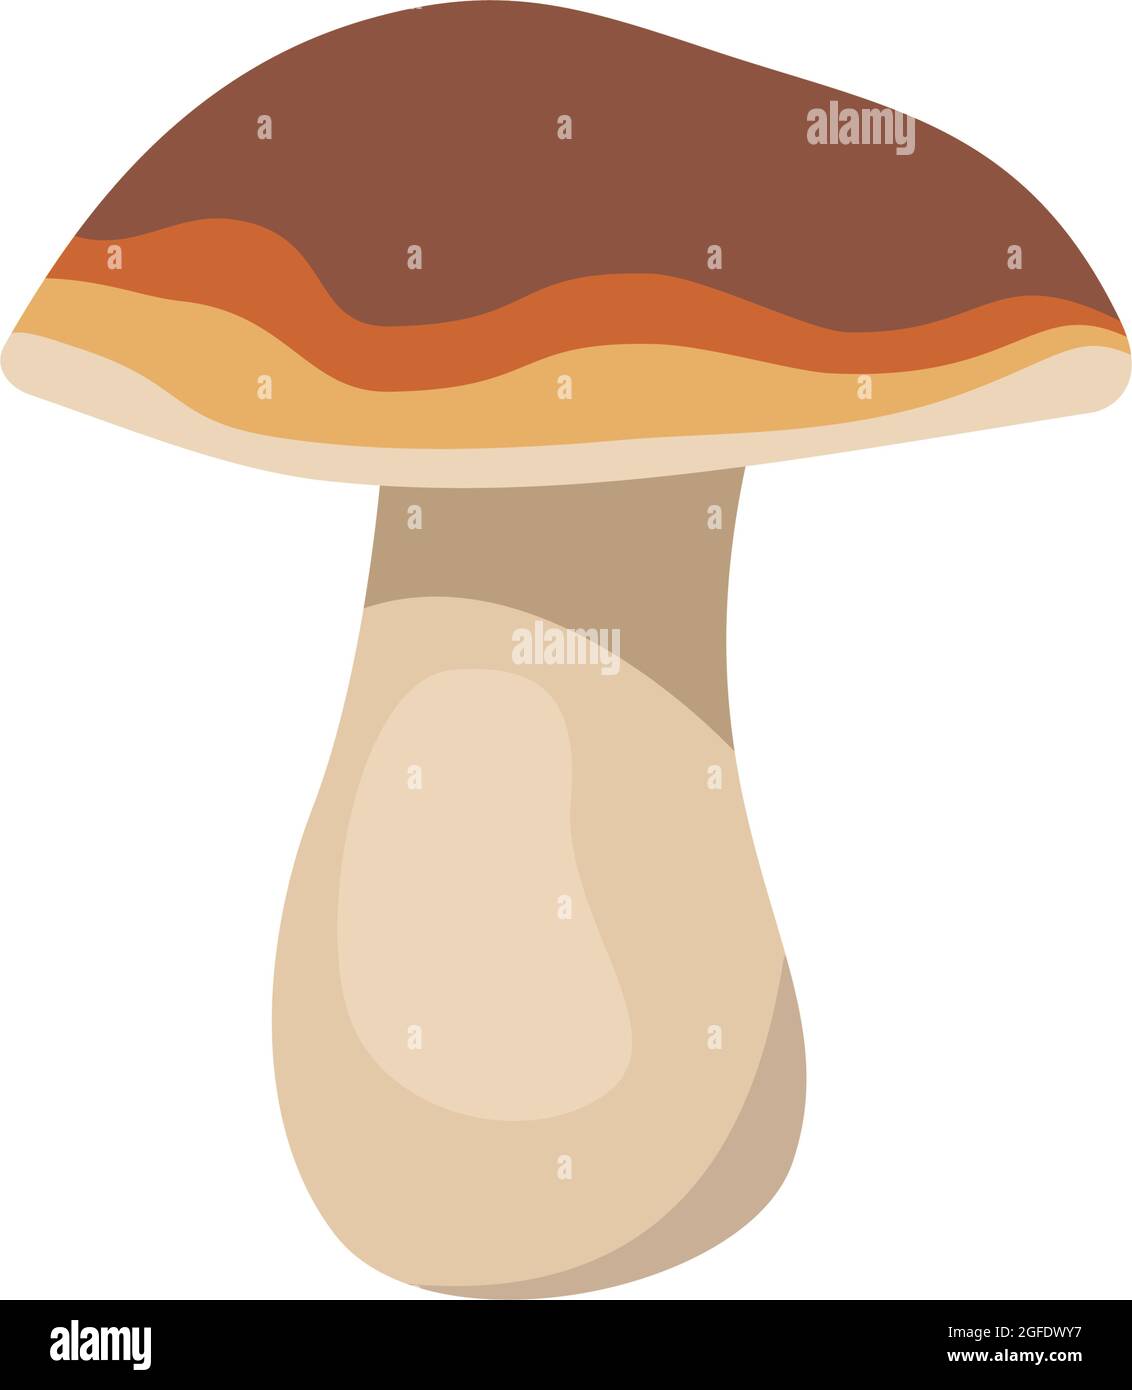 Mushroom icon. Healthy wholesome food, forest plant Stock Vector